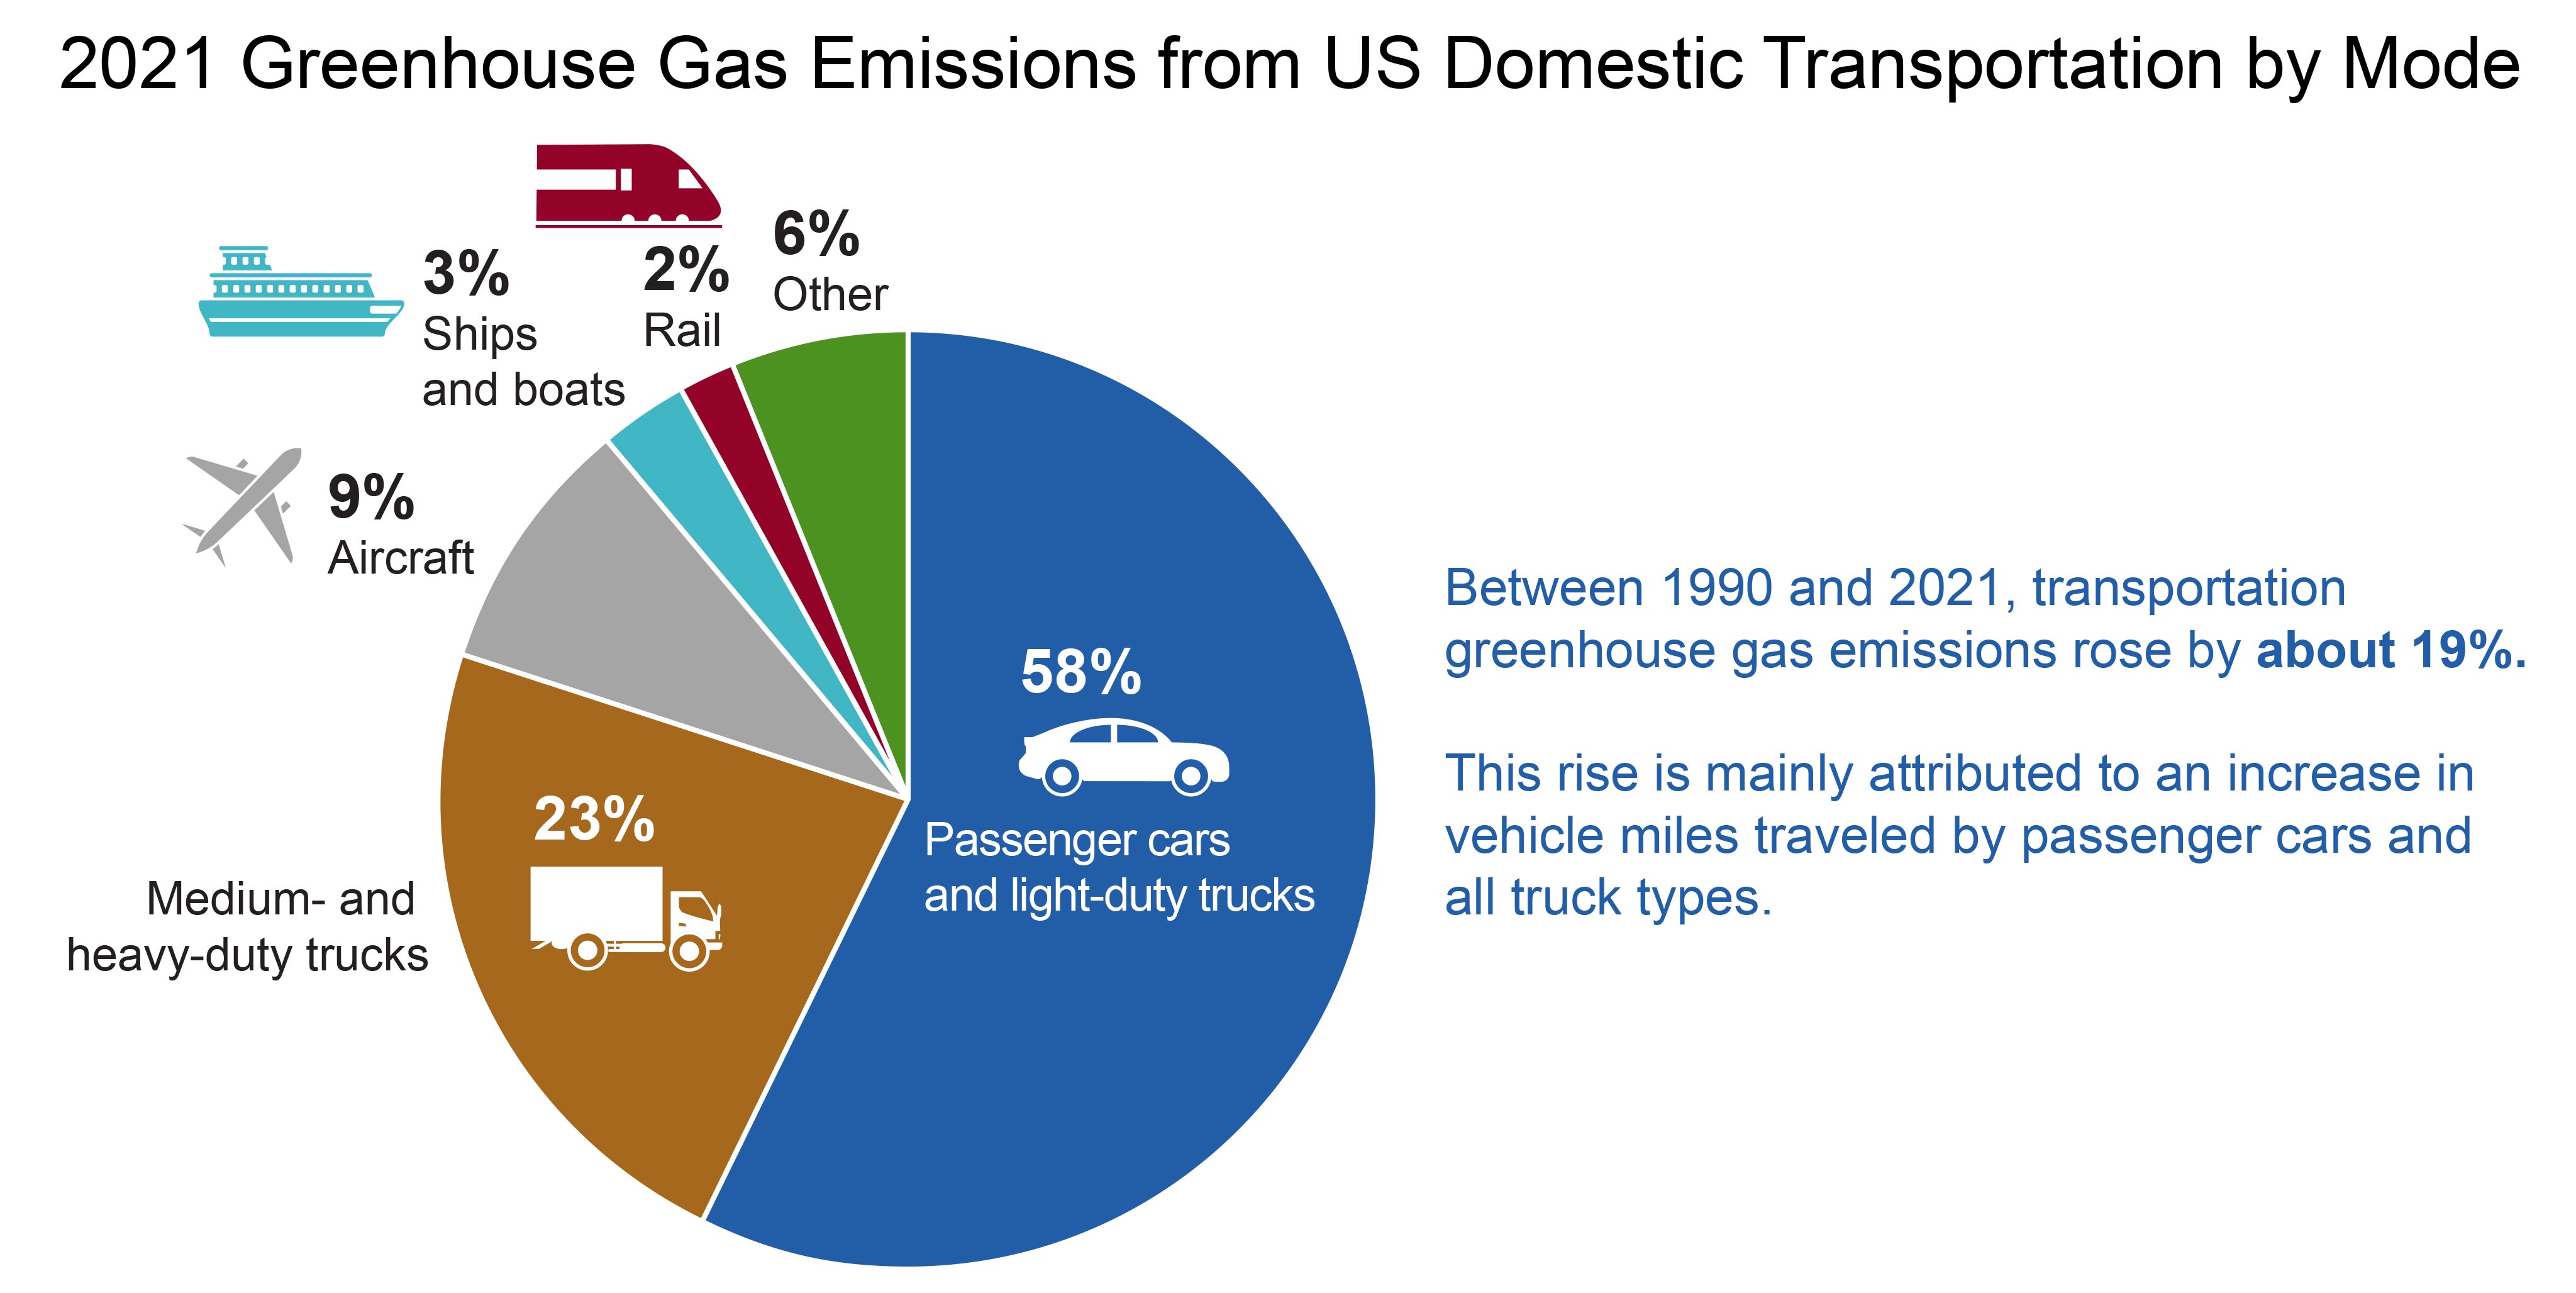 2021 Greenhouse Gas Emissions from US Domestic Transportation by Mode